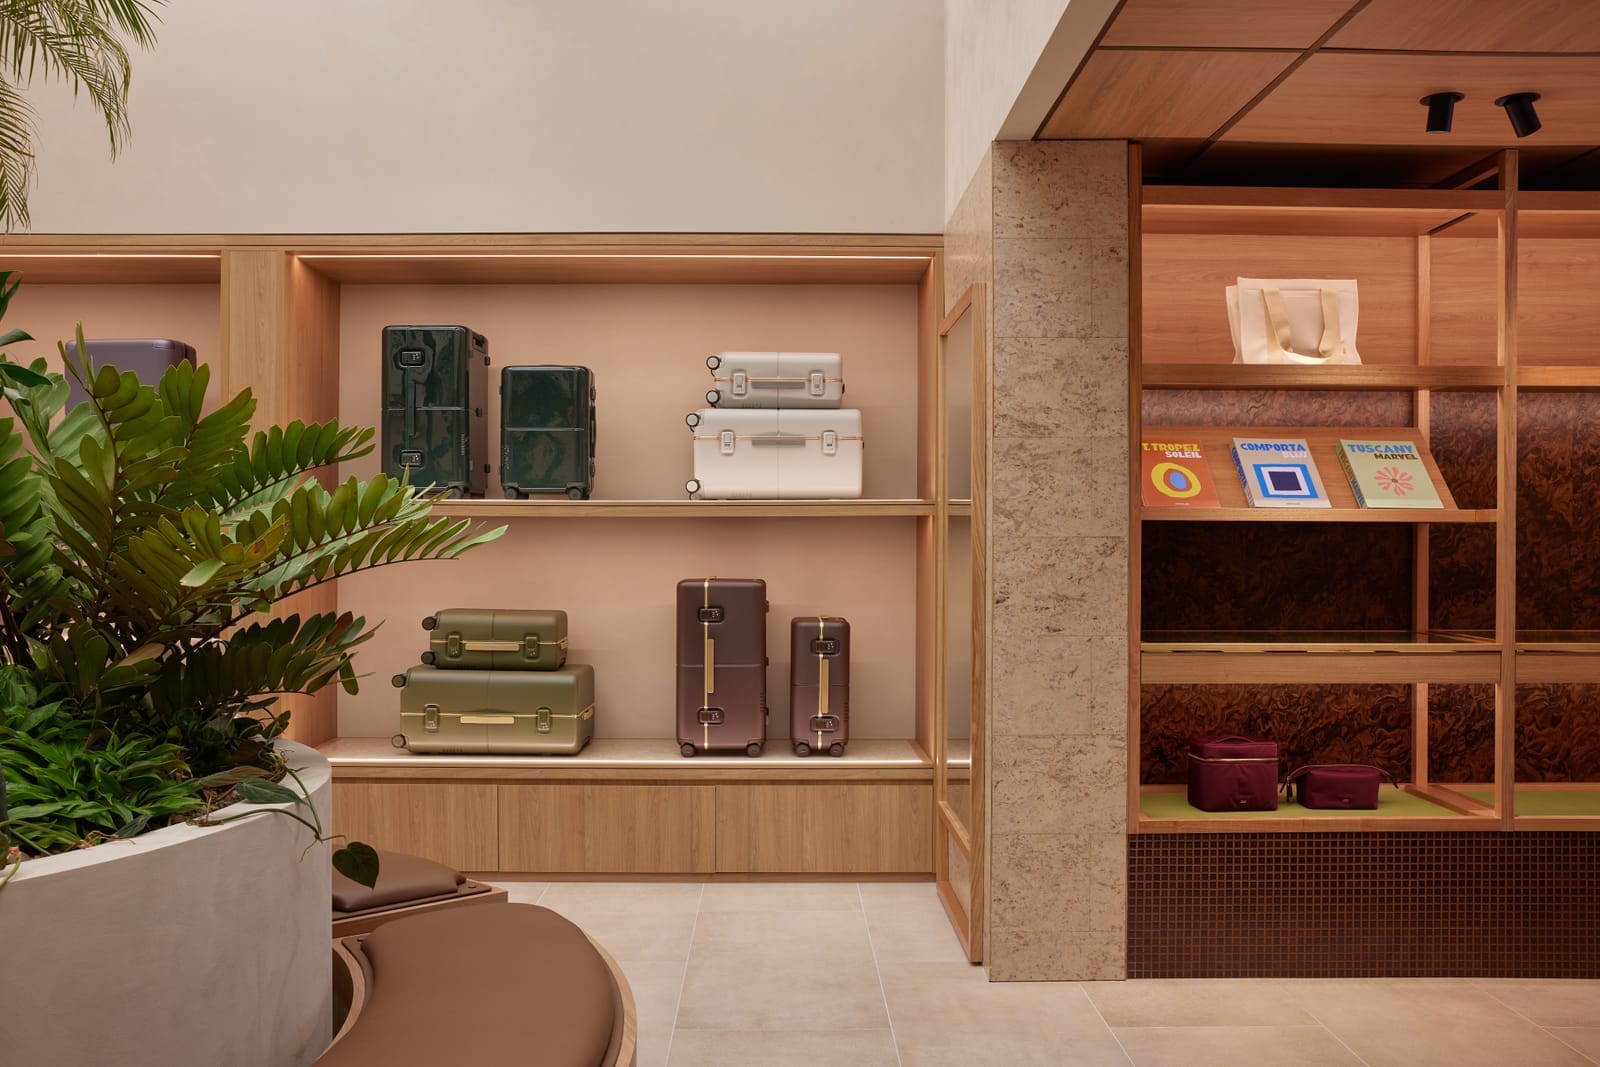 July Store by Acre. Photography by Cieran Murphy. Retail store with grey tiled floors and timber shelving. Array of coloured suitcases and books on shelves. Planter to left. 